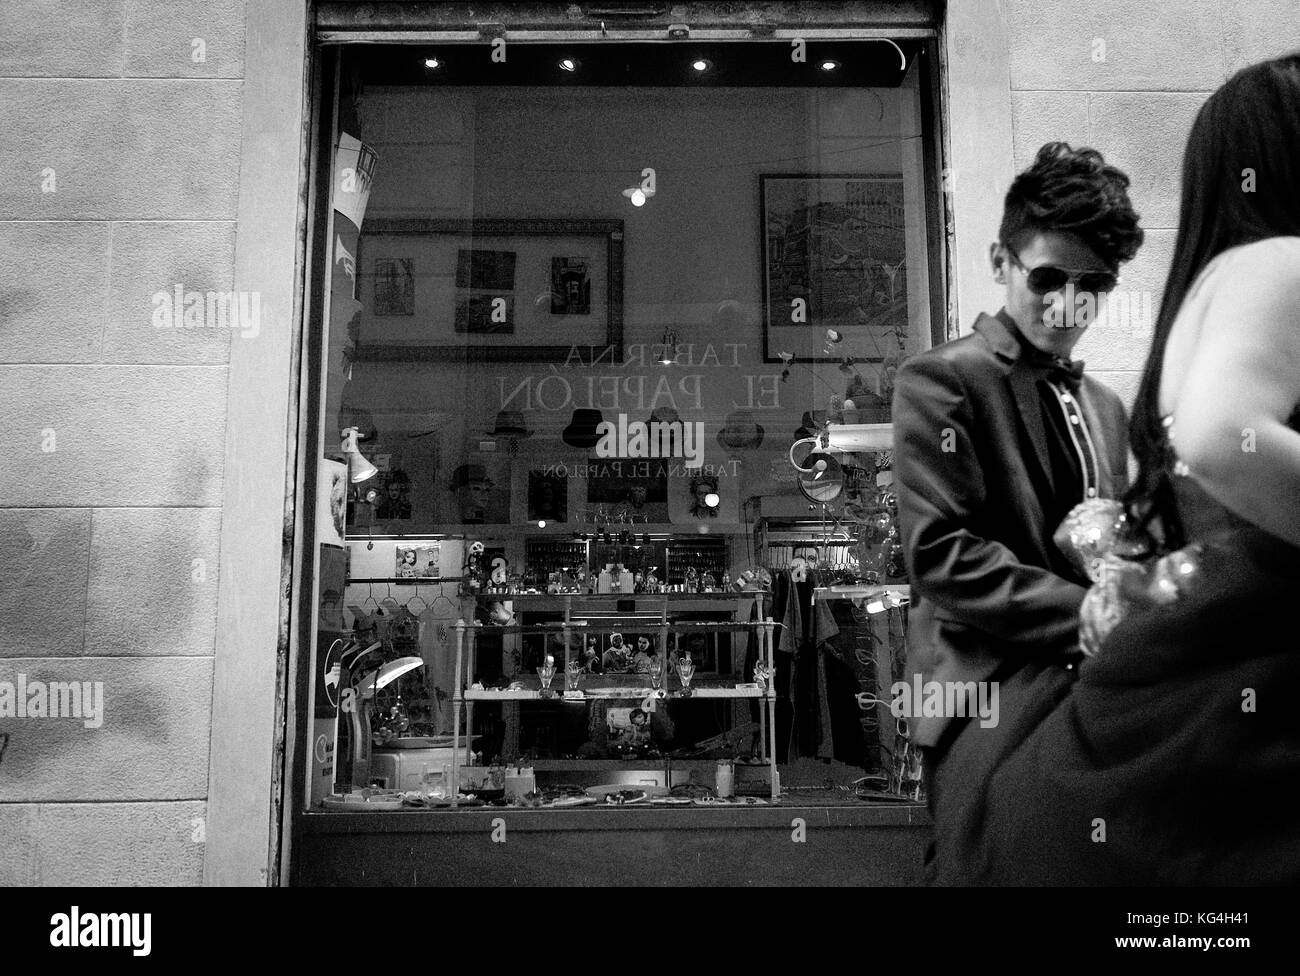 A recently married couple walks by the window of the 'Asi Si' fashion tendency shop that opened at the same space that Calçats Mila occupied years before in the Carme Street of Barcelona, Spain. Date: 07/09/2015. Photo: Xabier Mikel Laburu. The shoe shop Calçats Mila is documented with an other name in 1846. In the beginnings of the XX century, the shop is sold to the Mila family who would take care of it until the death of Roser, the last owner after her brother Joan who would have the tough job to close the shop in 2003. Stock Photo